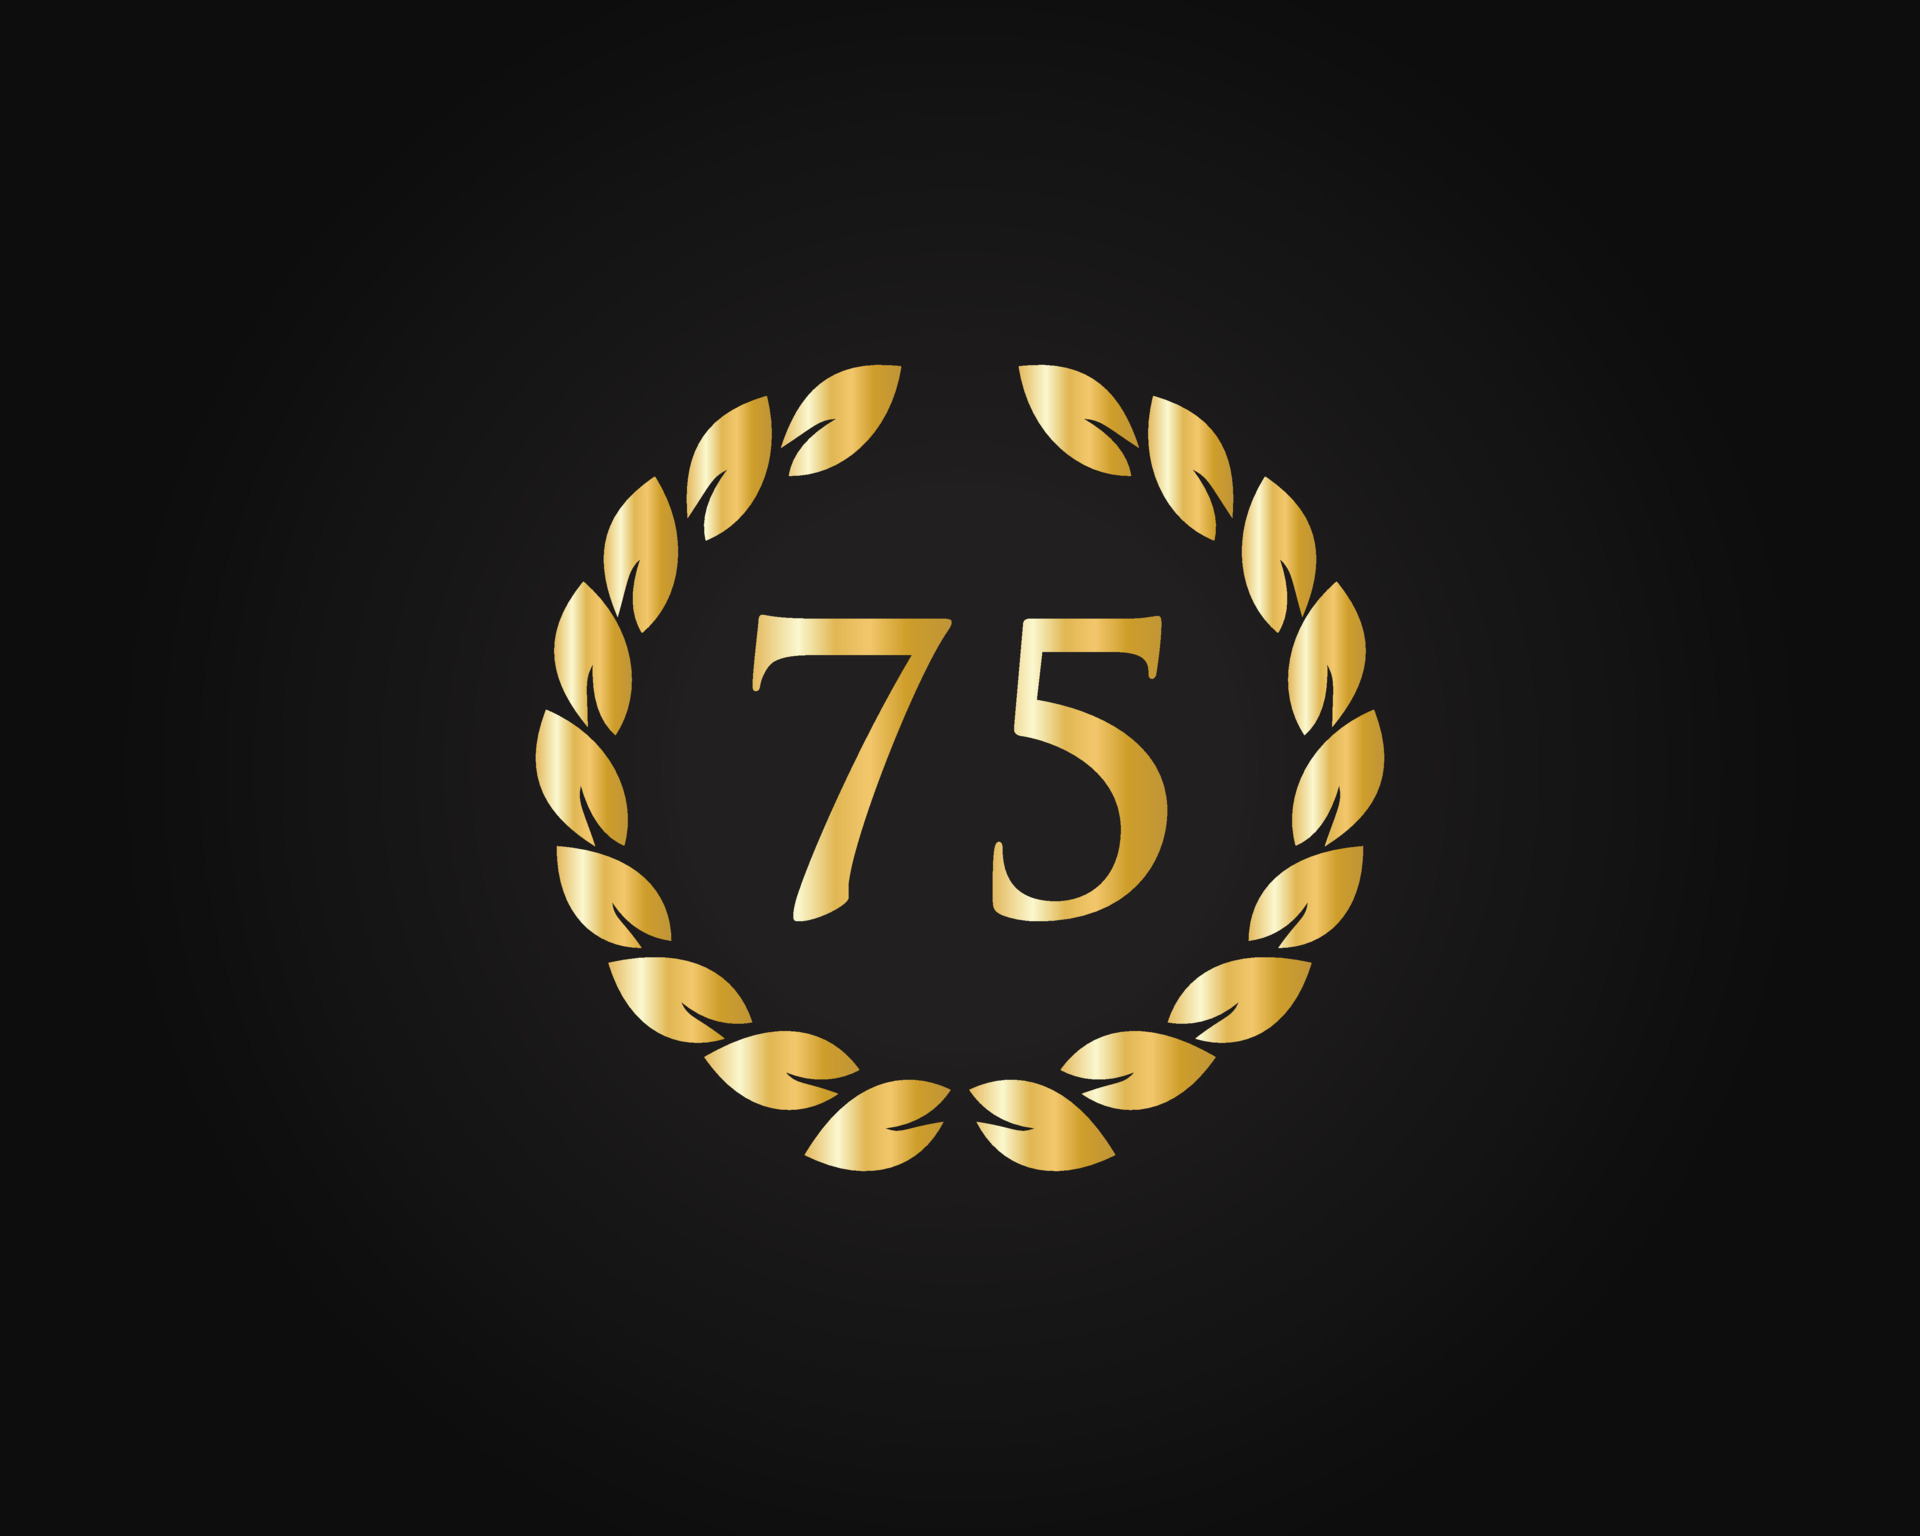 75th Years Anniversary Logo With Golden Ring Isolated On Black